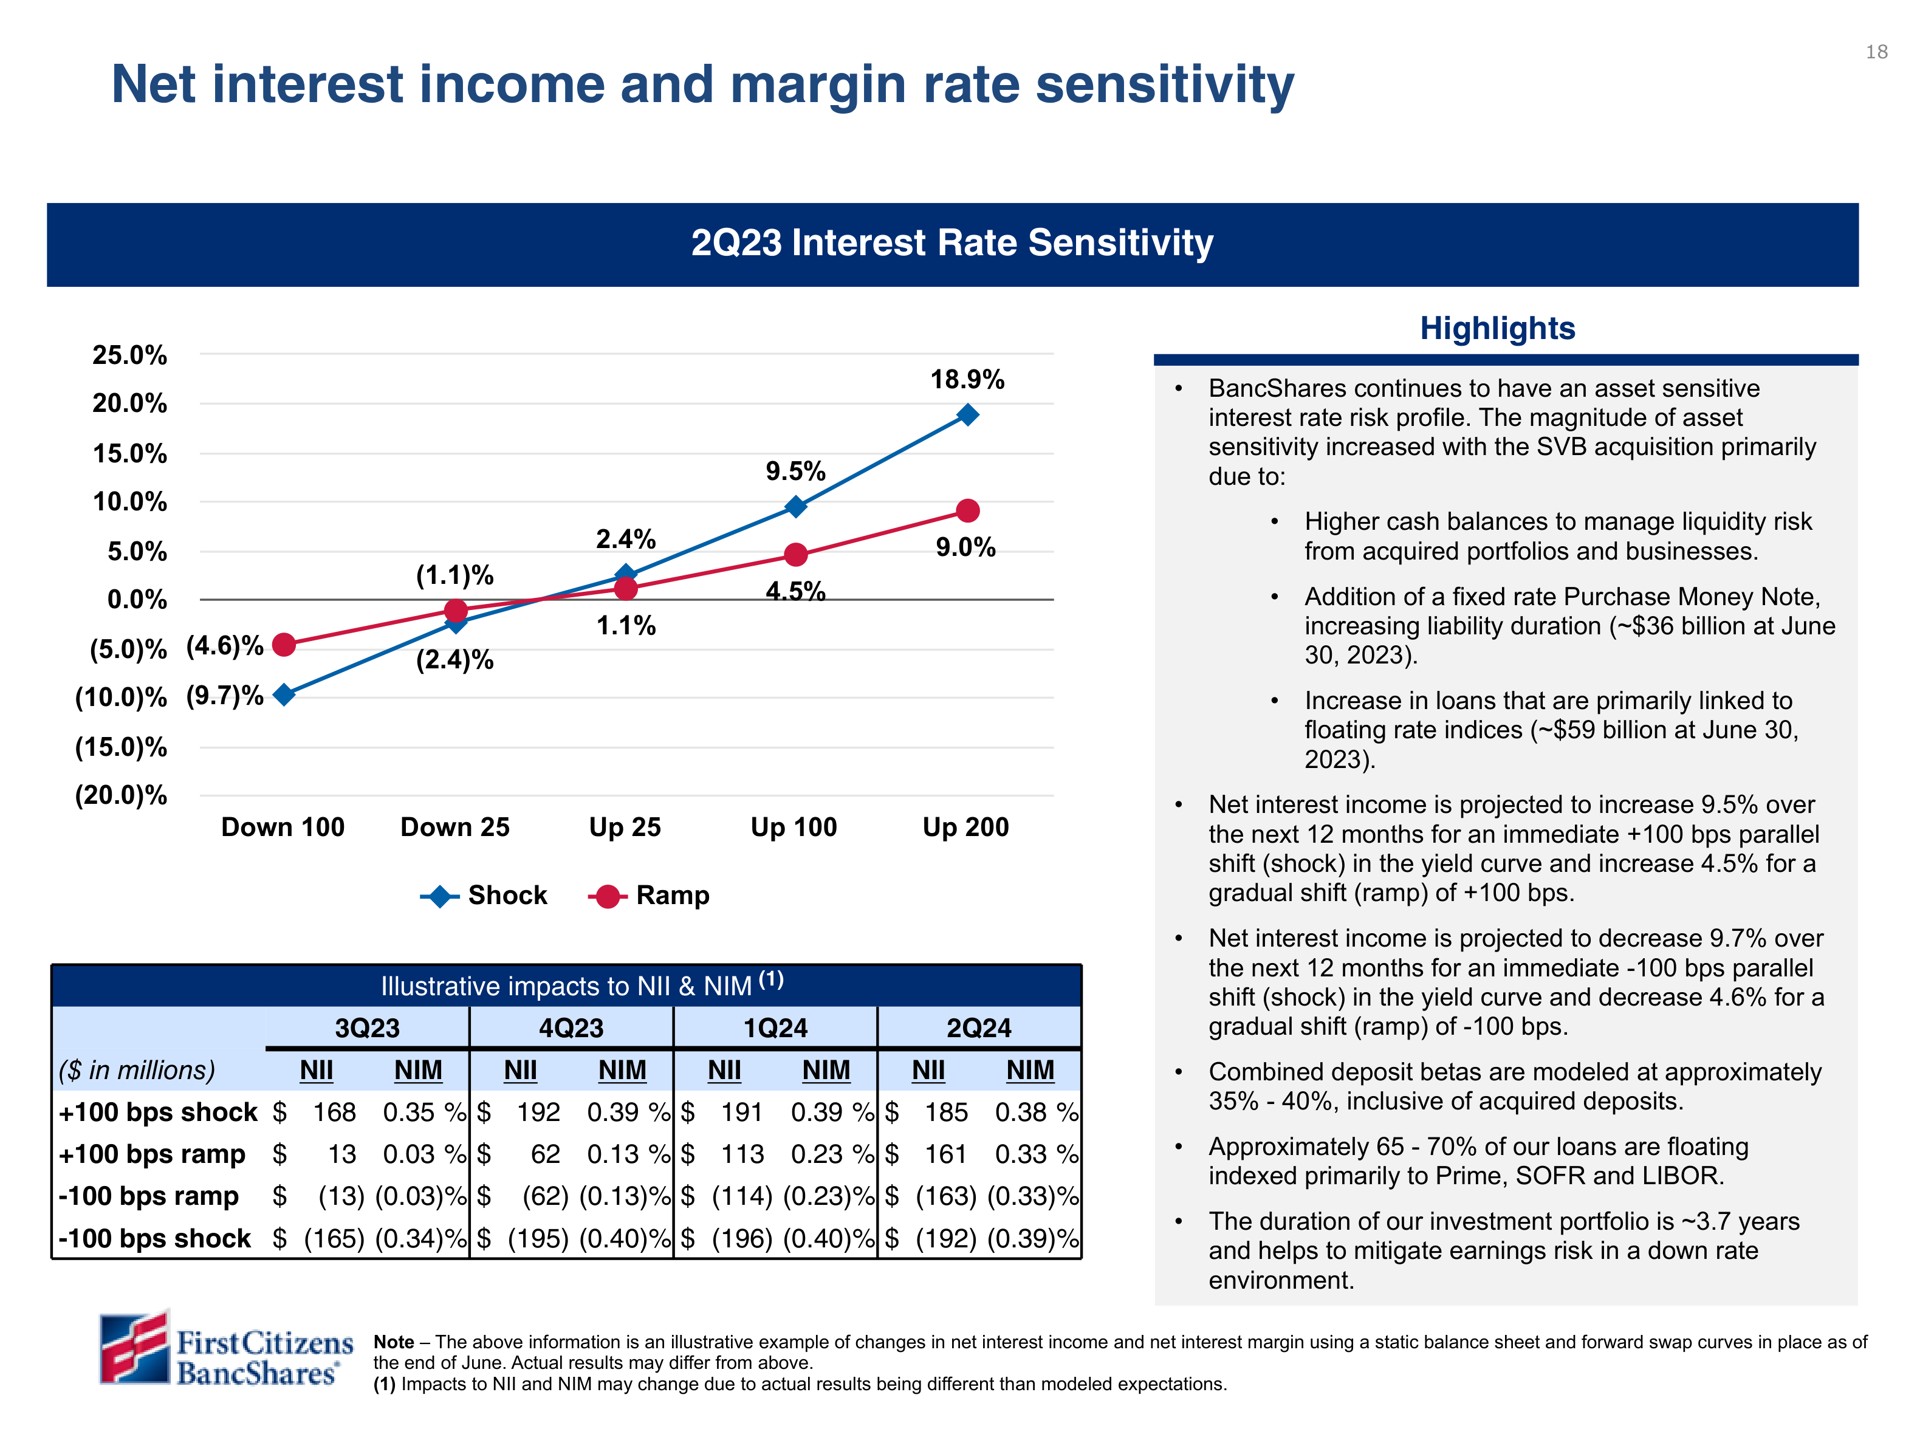 net interest income and margin rate sensitivity i ramp shock i | First Citizens BancShares